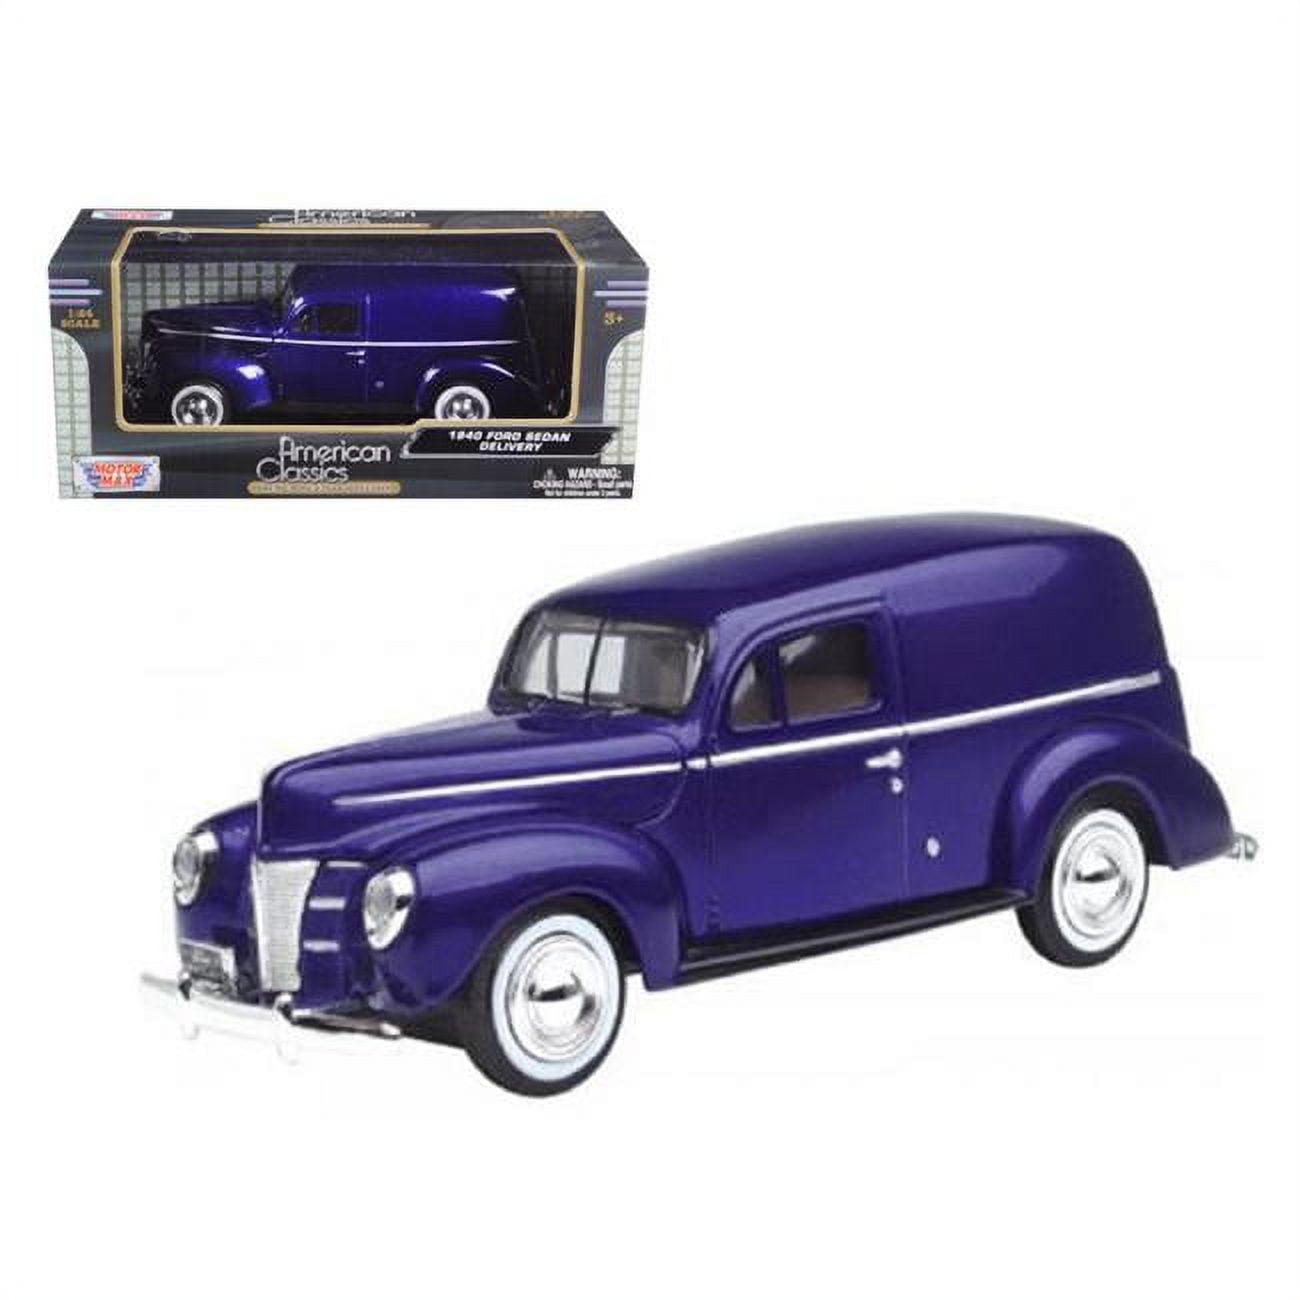 73250pur 1 by 24 1940 Ford Sedan Delivery Diecast Car Model - Purple -  MOTORMAX